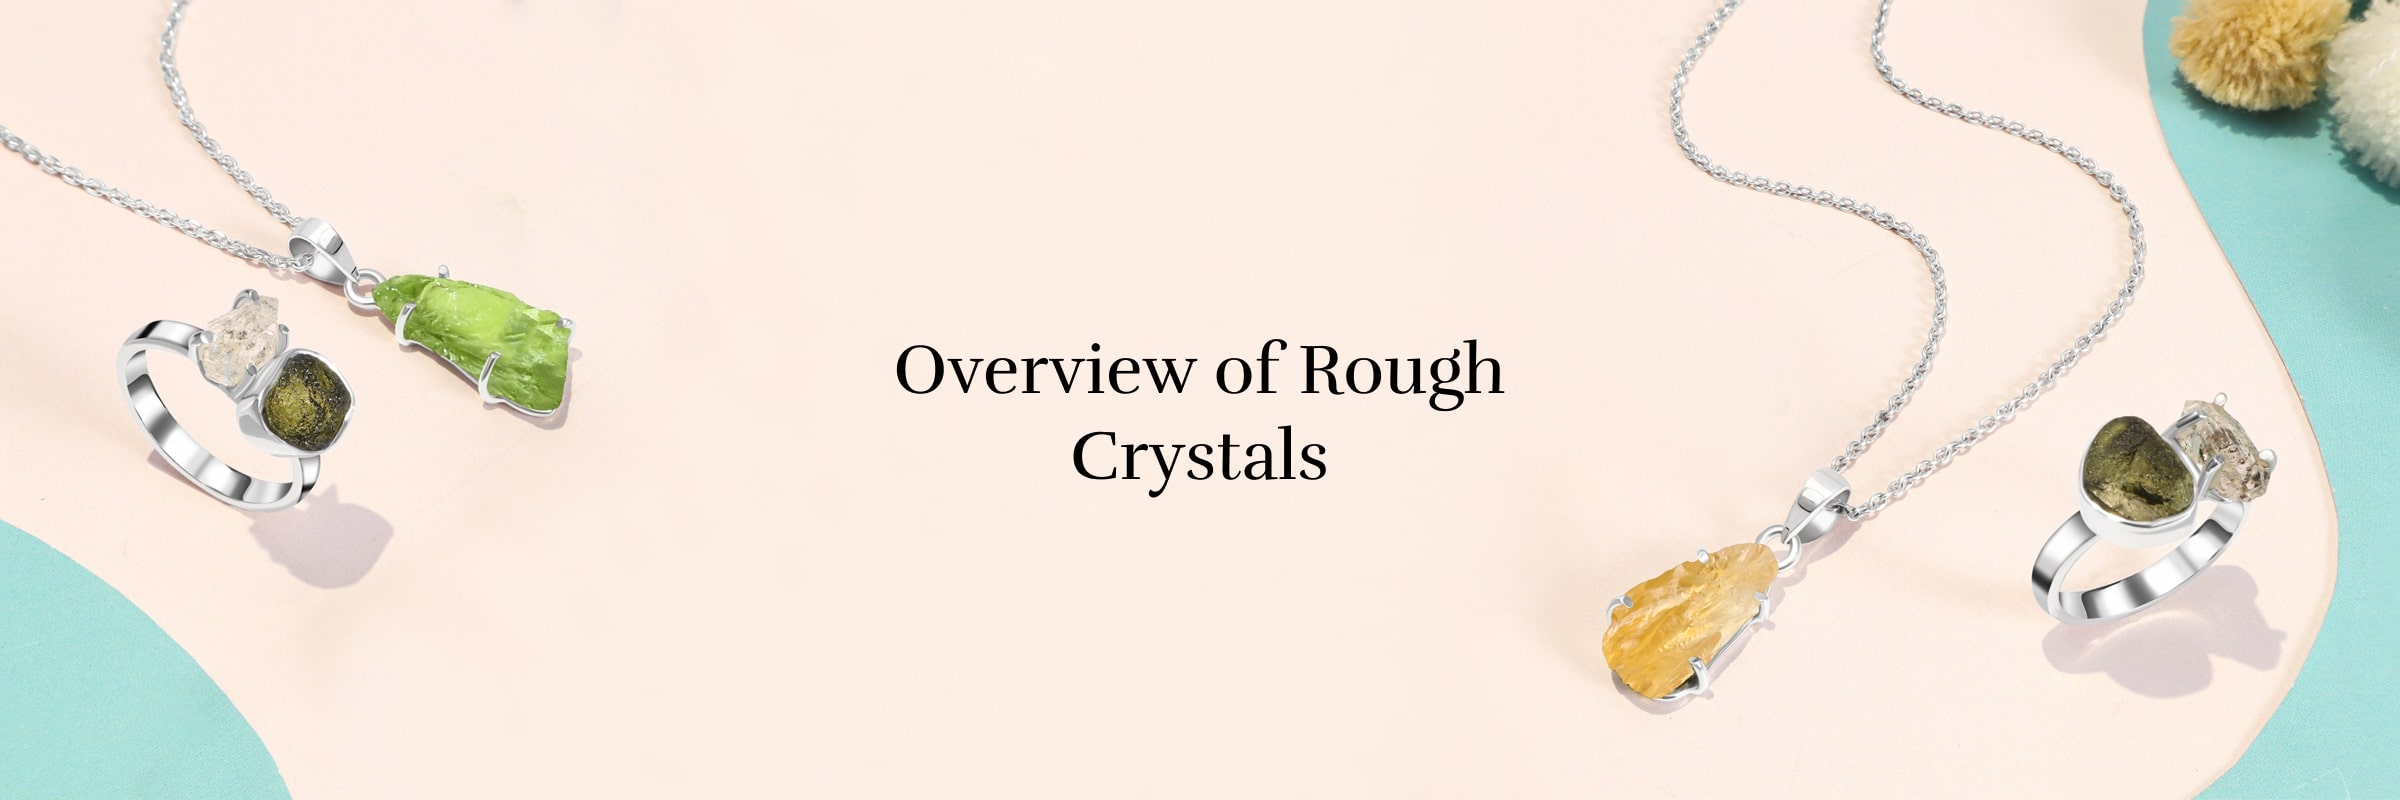 Properties and Characteristics of Rough Crystals